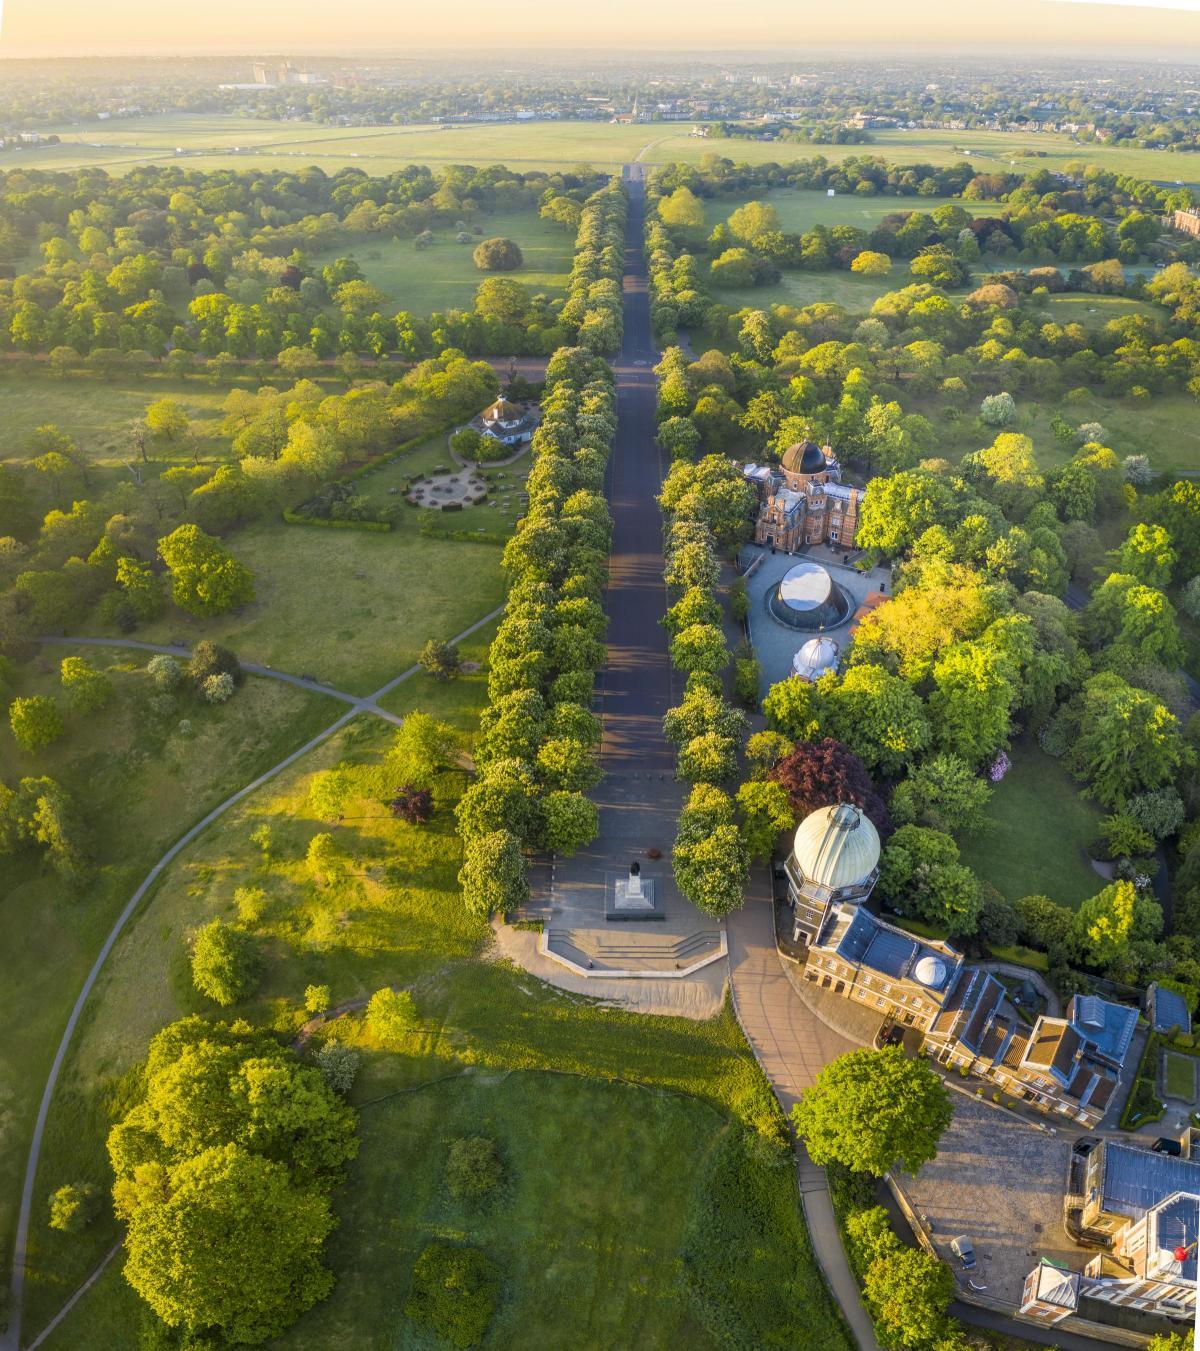 Revised plans for £10m transformation of Greenwich Park | Shopper